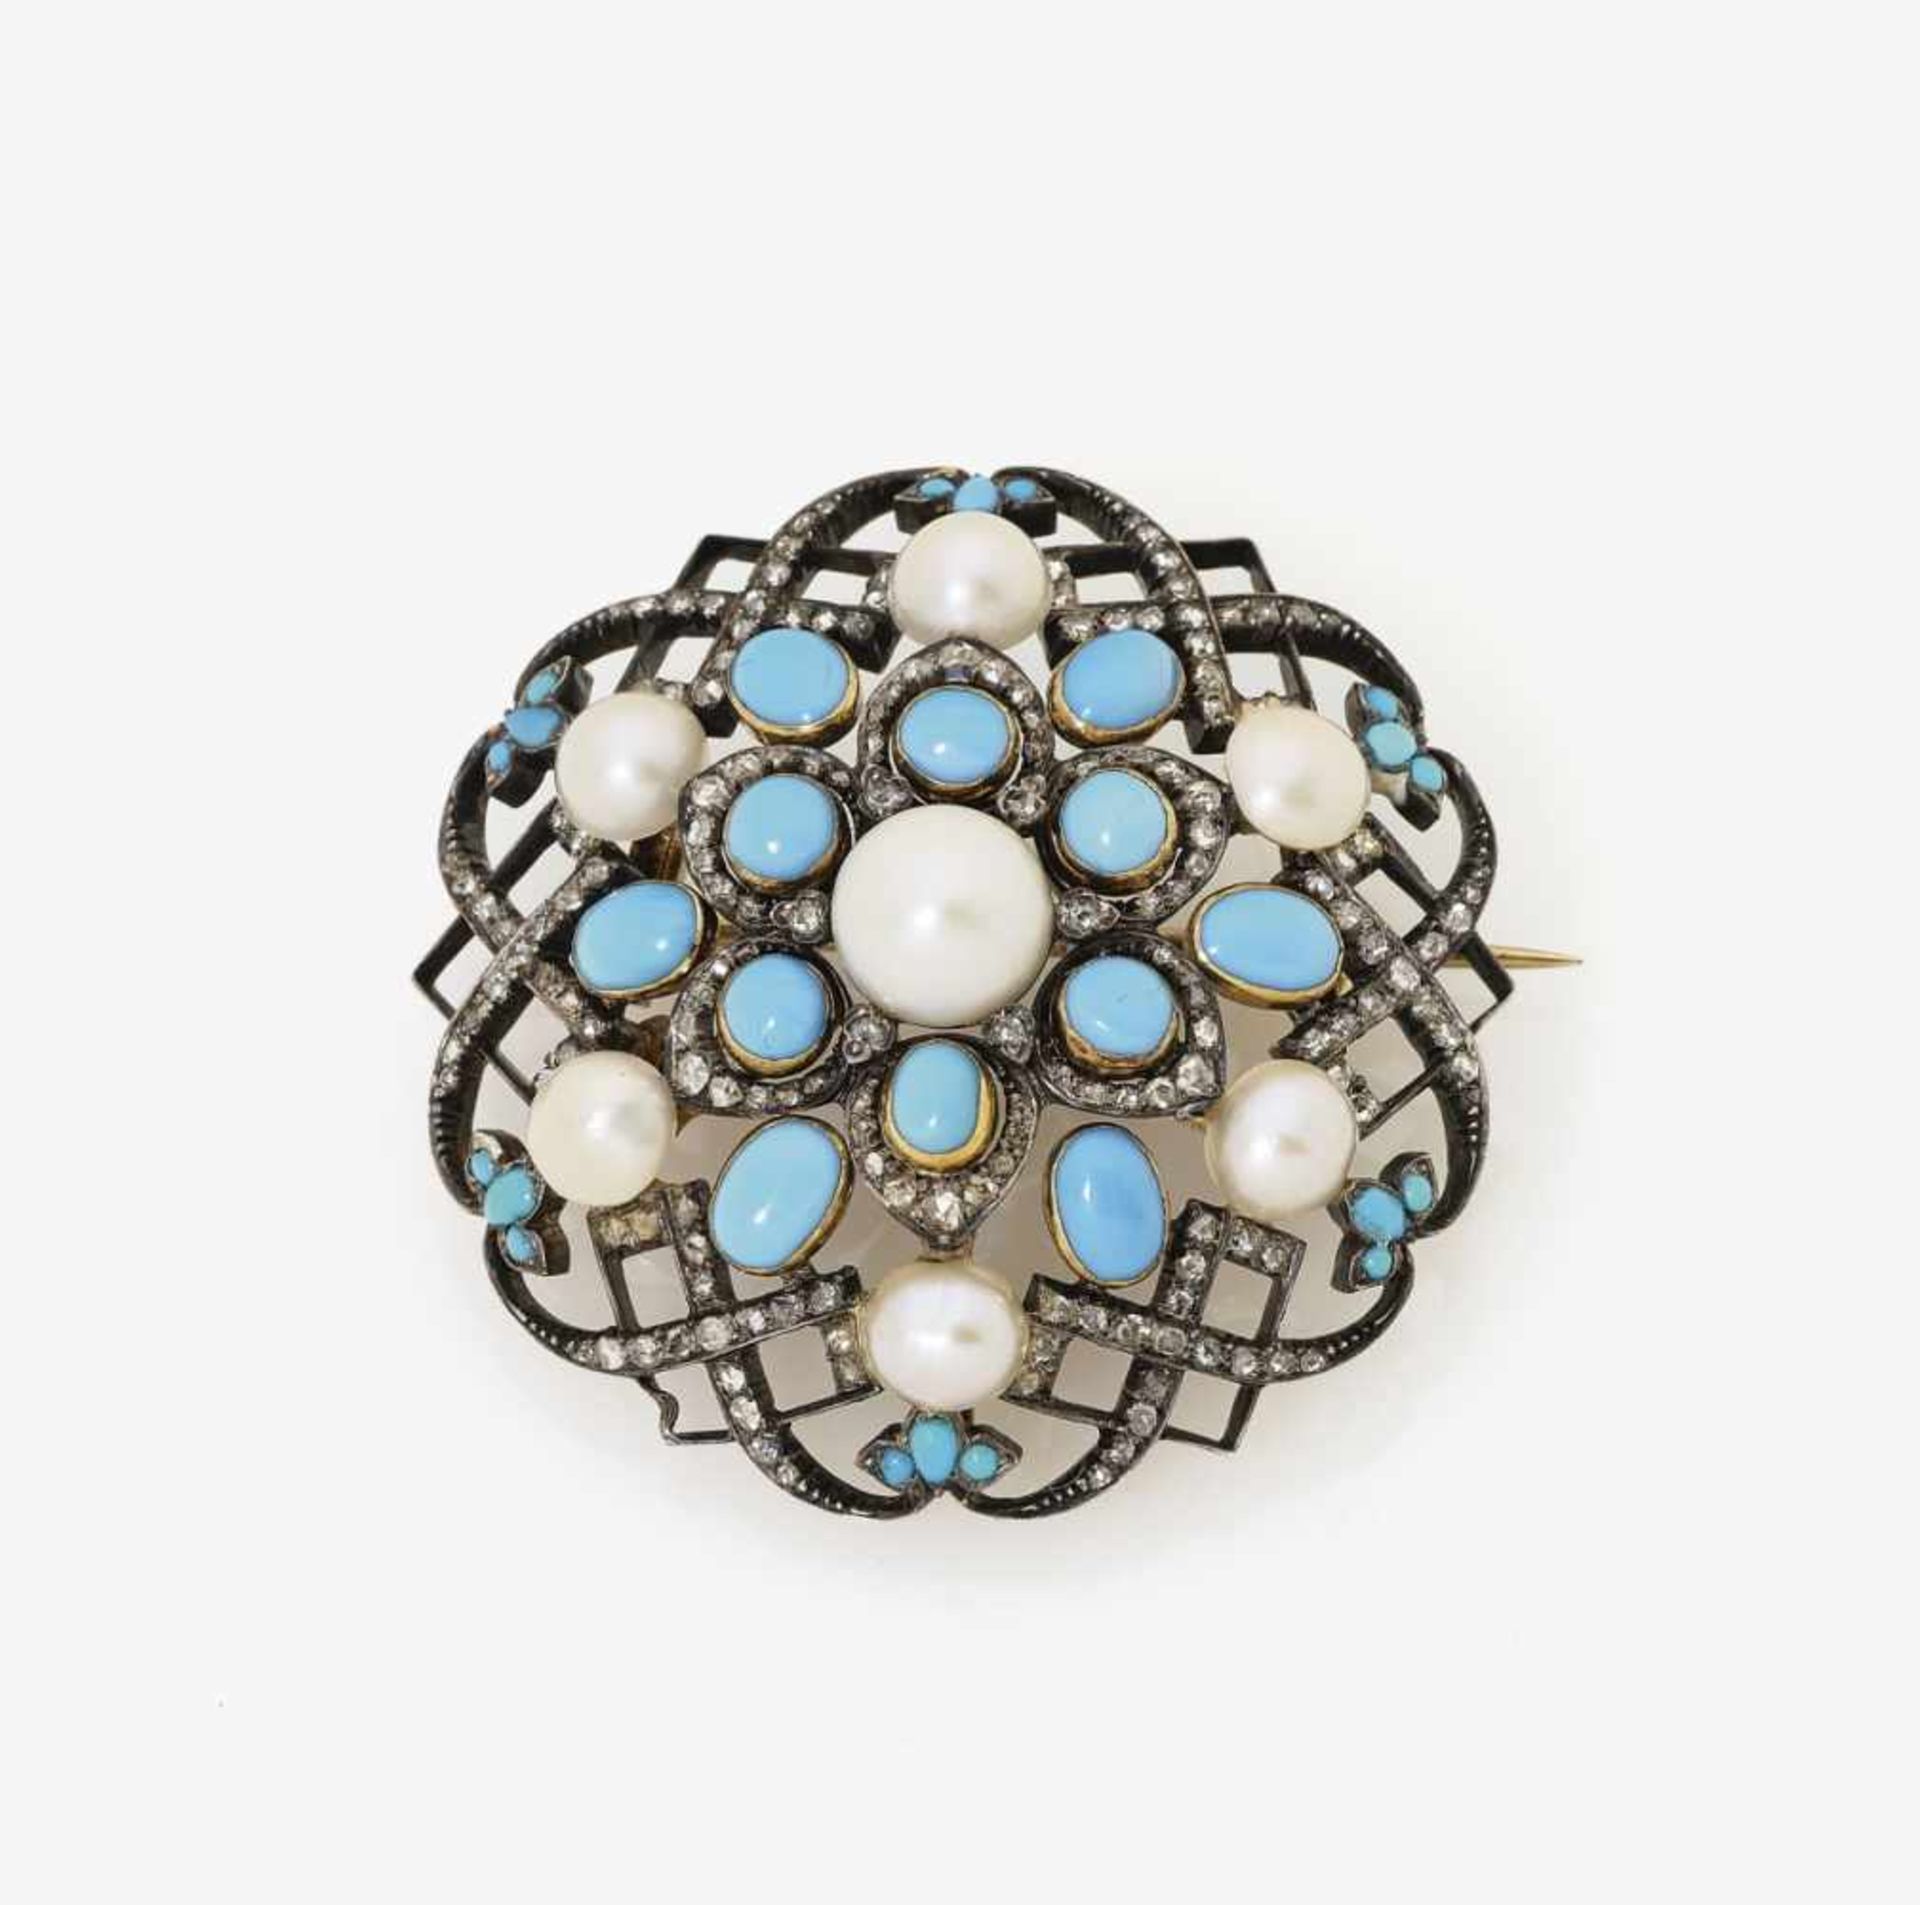 A Turquoise, Seed Pearl and Diamond BroochFrance, circa 1880 18K gold (750/-) and silver, tested.